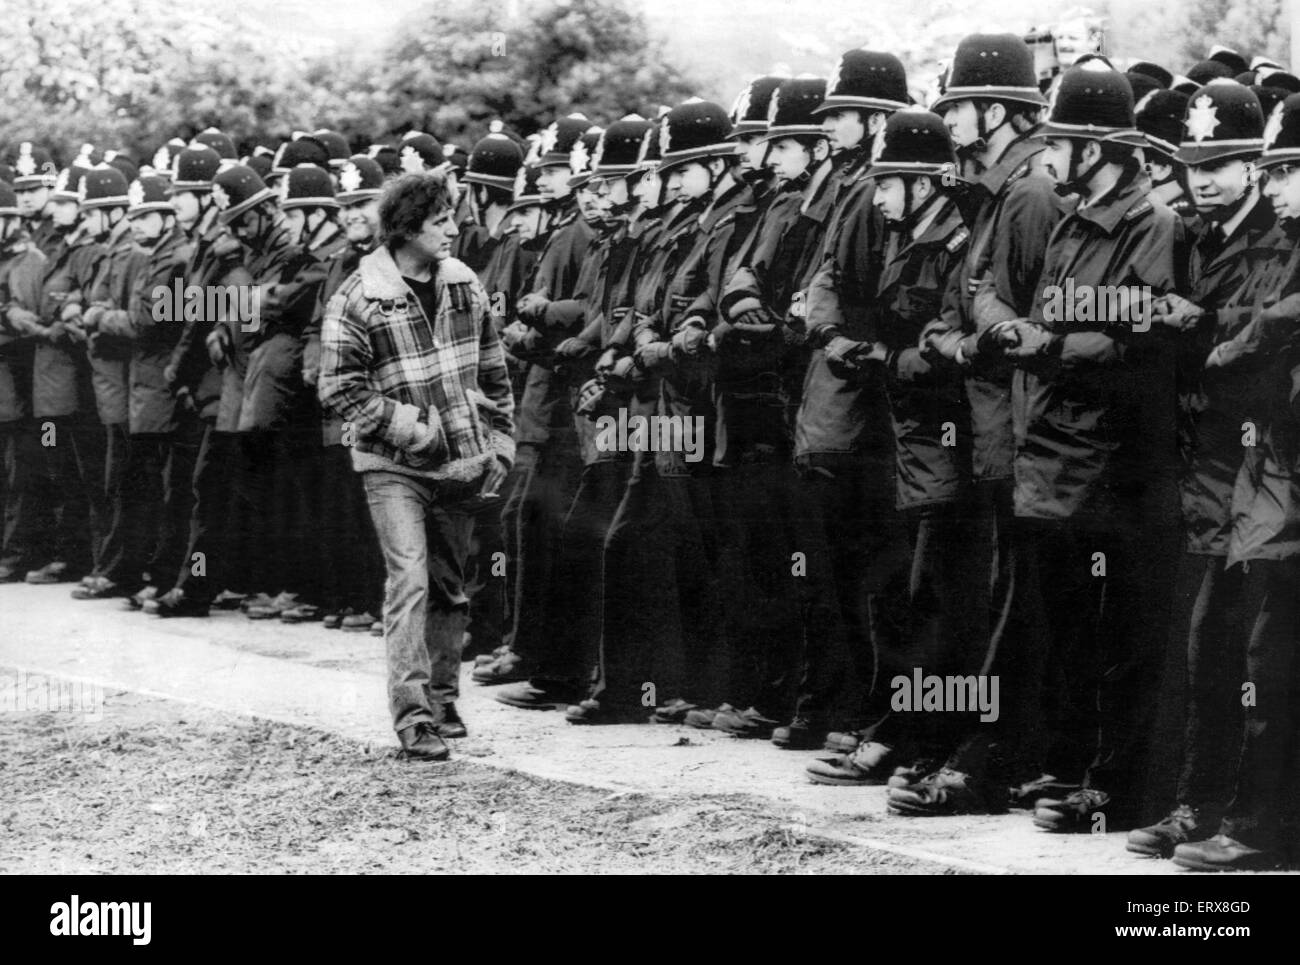 Miners Strike 1984 - 1985 Pictured. Miner Eric Hudson inspects the guard of police officers in the front line at Orgreave coking plant near Sheffield Yorkshire Monday 4th June 1984.    On 6th March 1984 the National Coal Board announced that the agreement Stock Photo